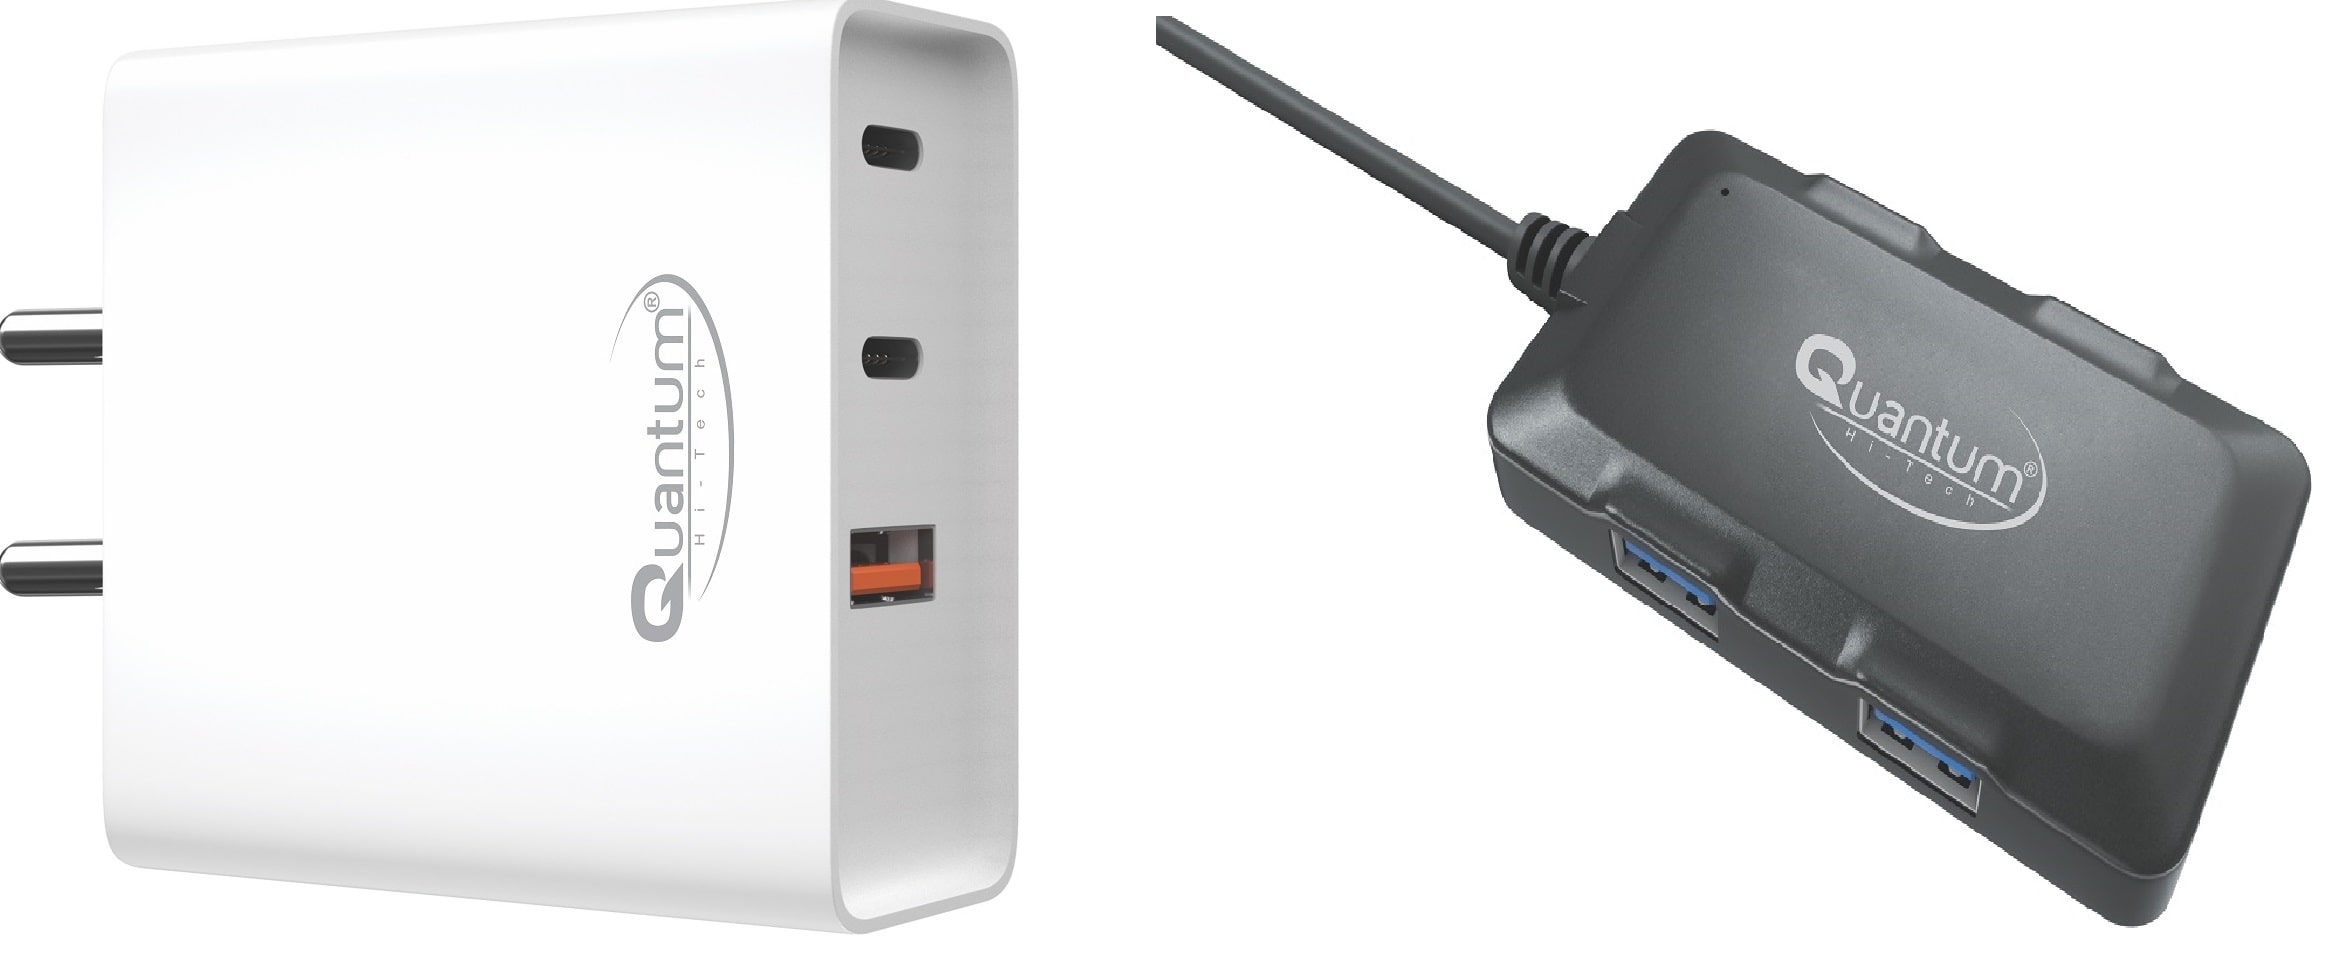 Quantum launches 65W PD charger and multipurpose Type C USB Hub